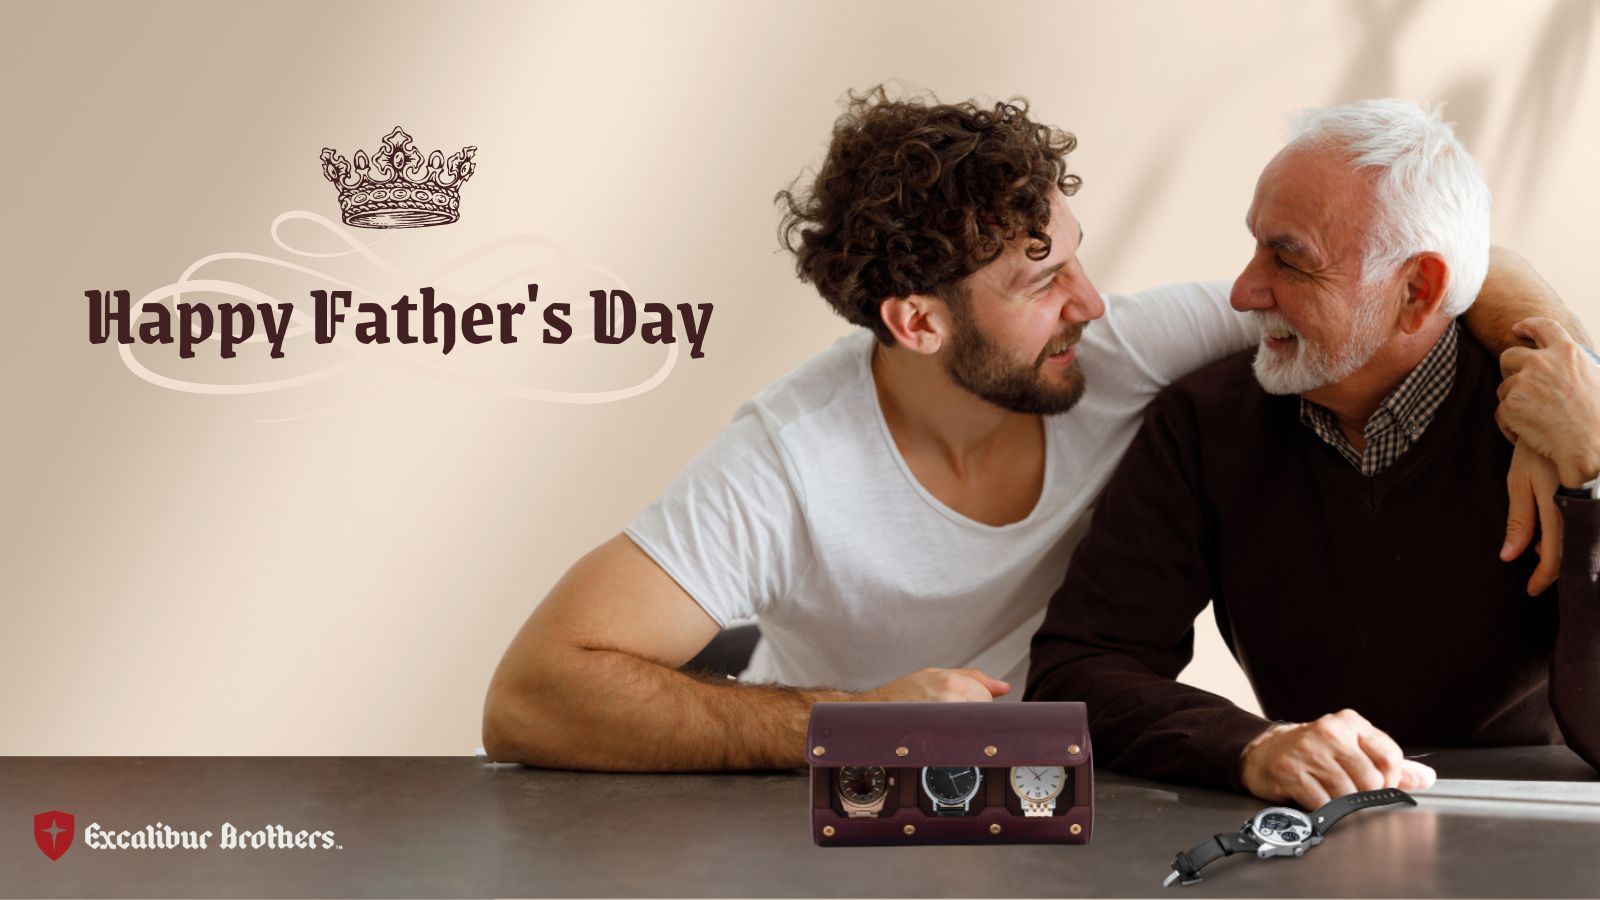 Featured image for “Worthwhile Ways to Celebrate Father’s Day”